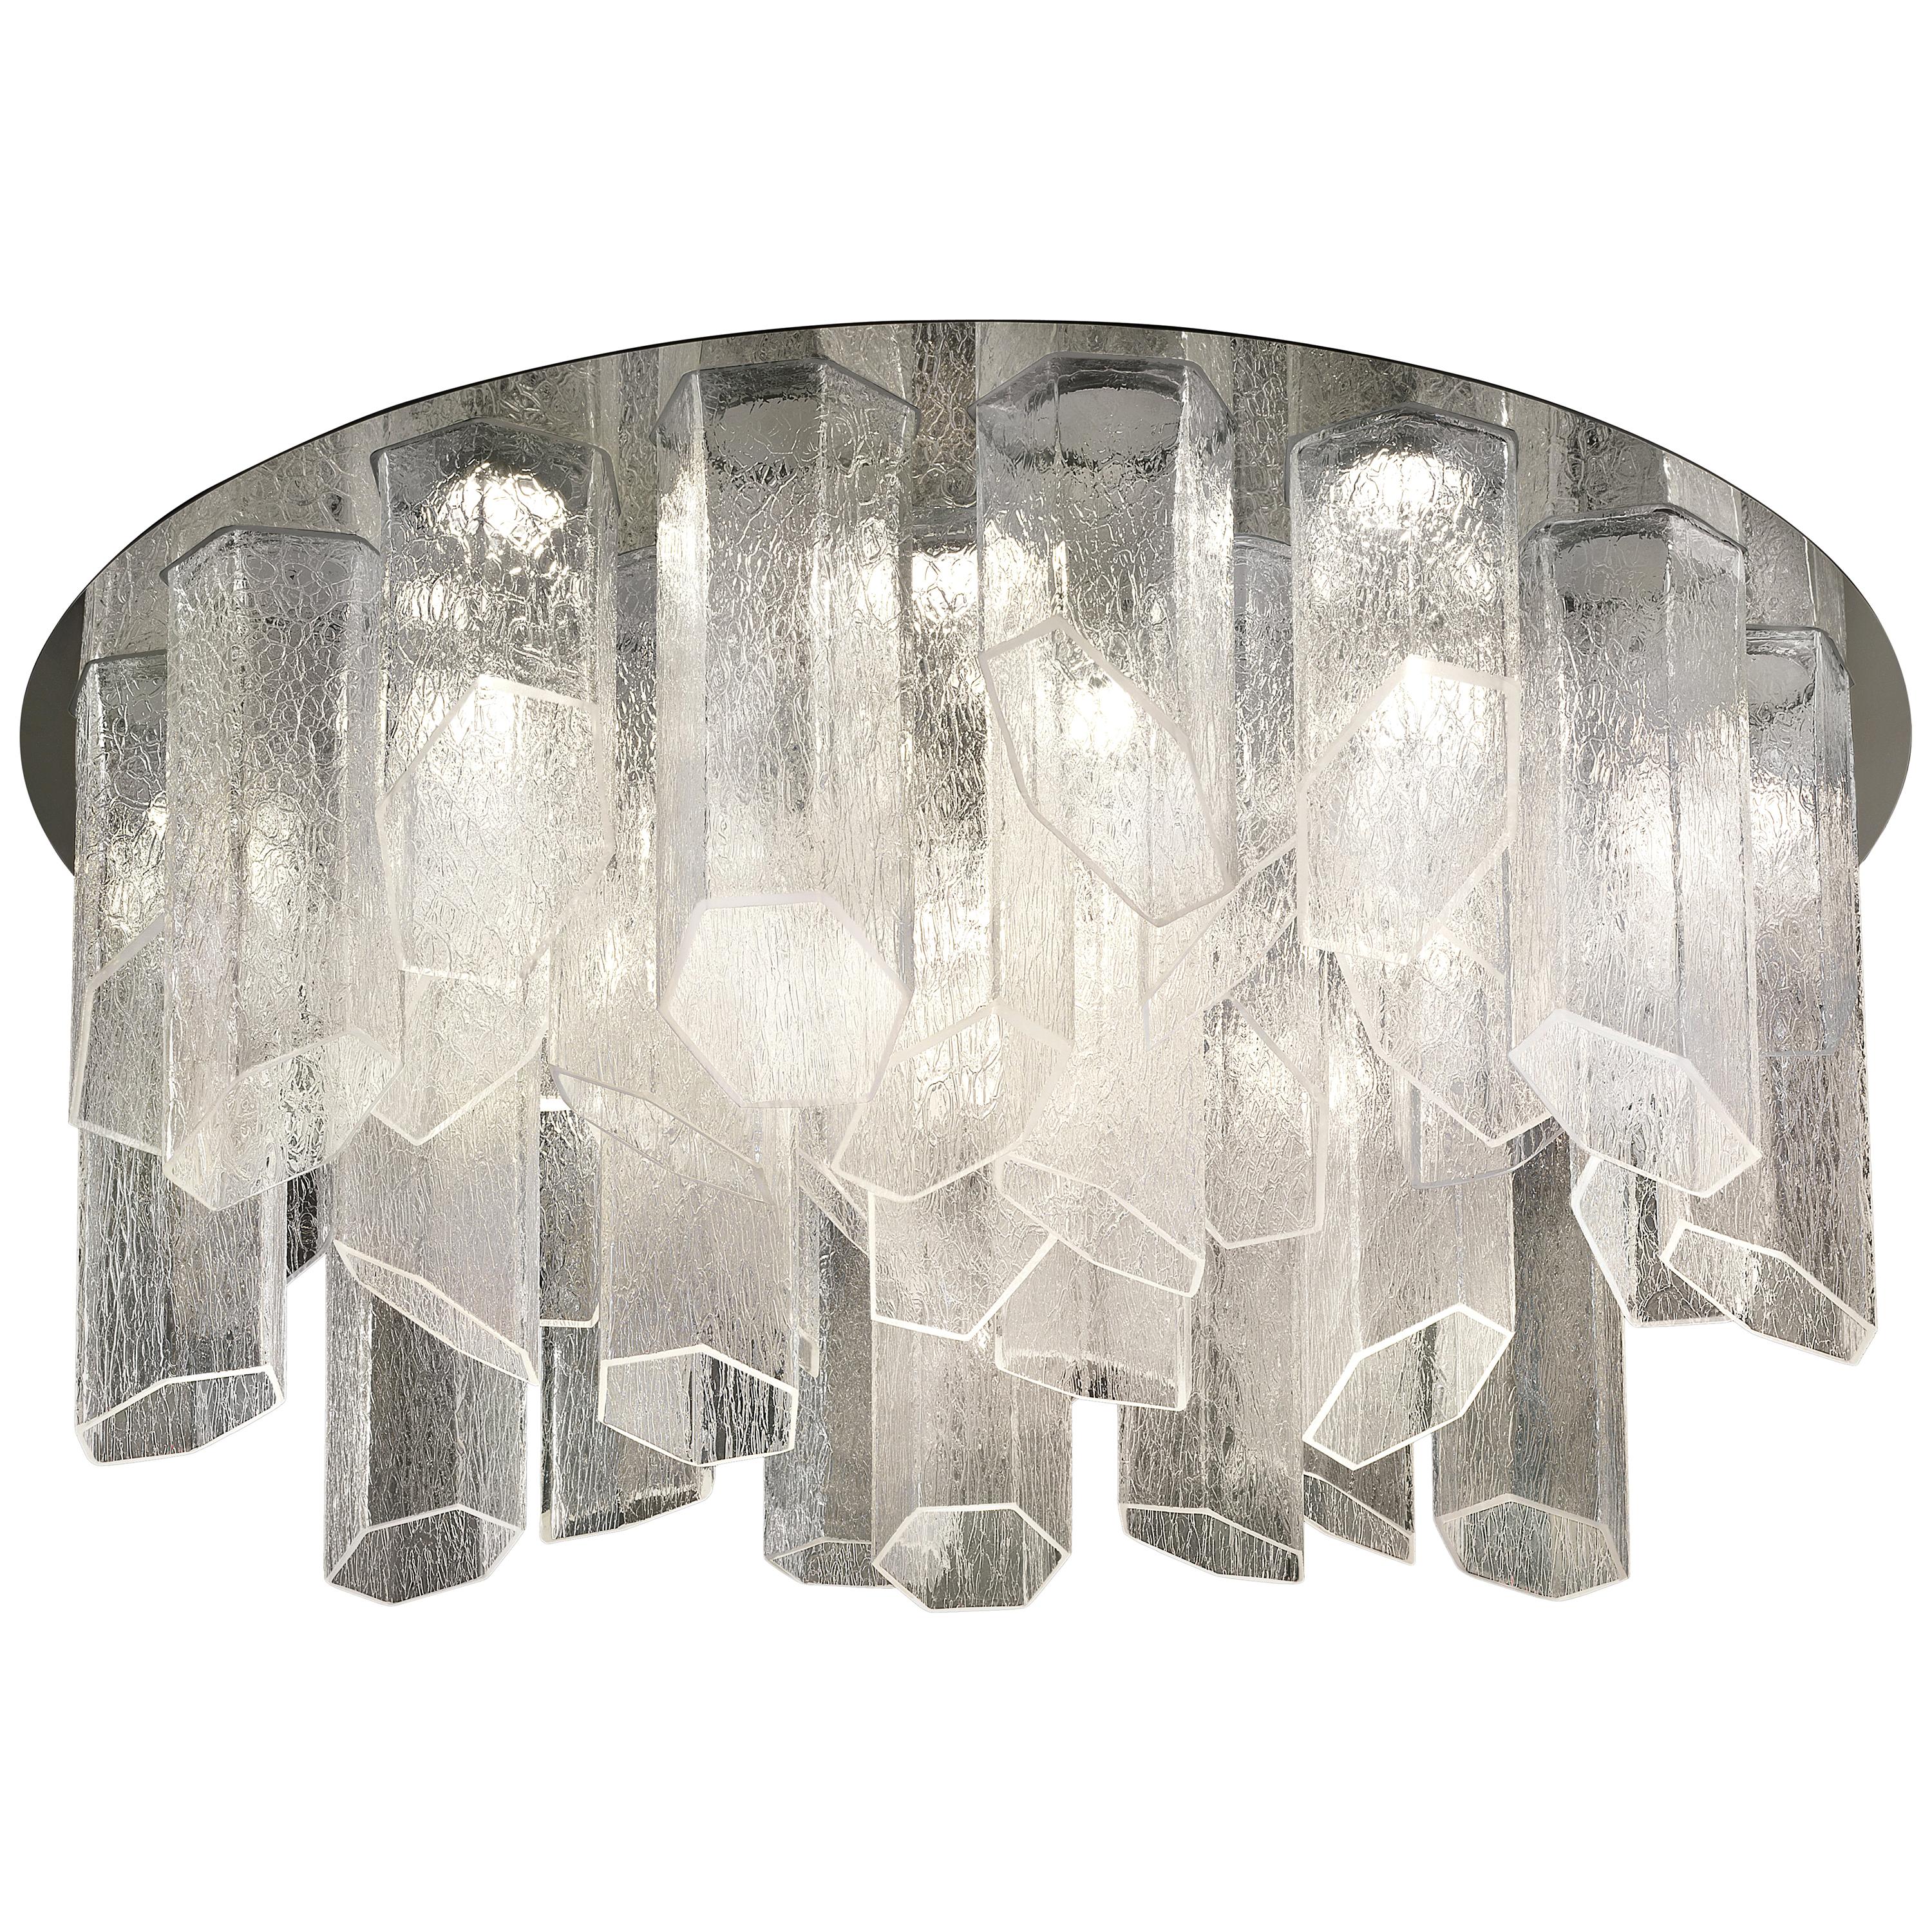 Trim 7319 Ceiling Lamp in Glass with Polished Chrome Finish, by Barovier&Toso